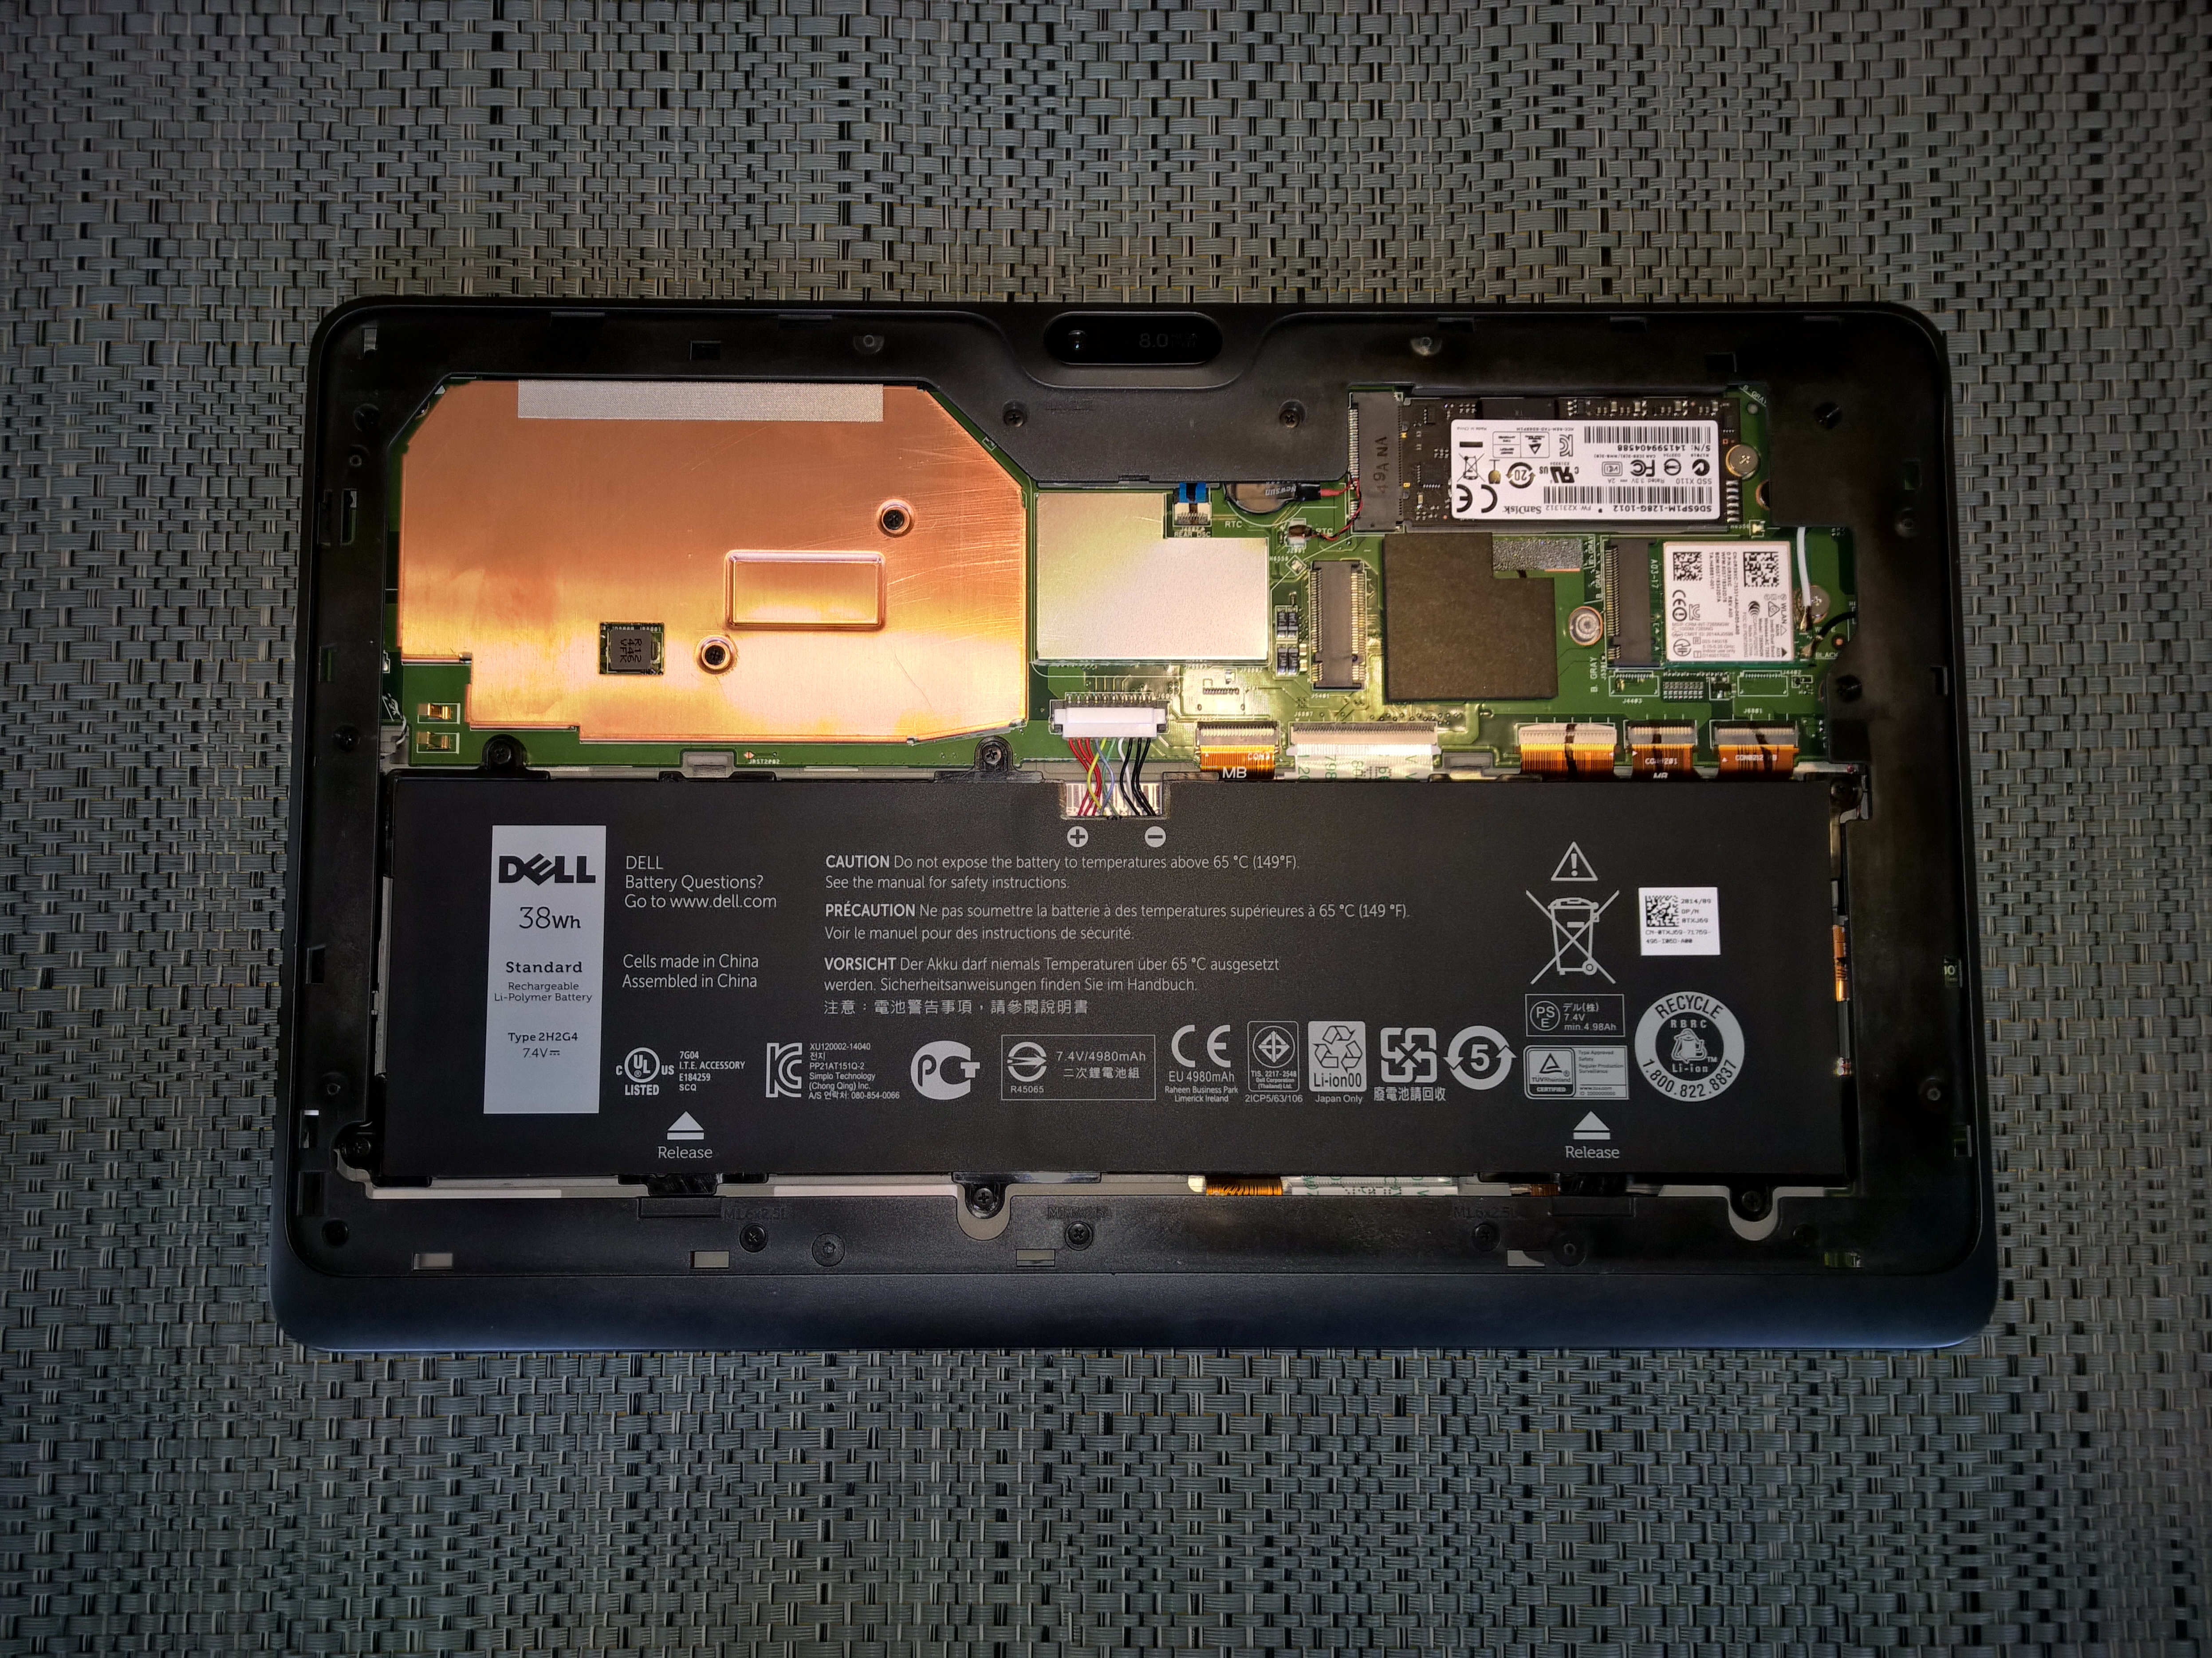 System Performance - The Dell Venue 11 Pro 7000 Review